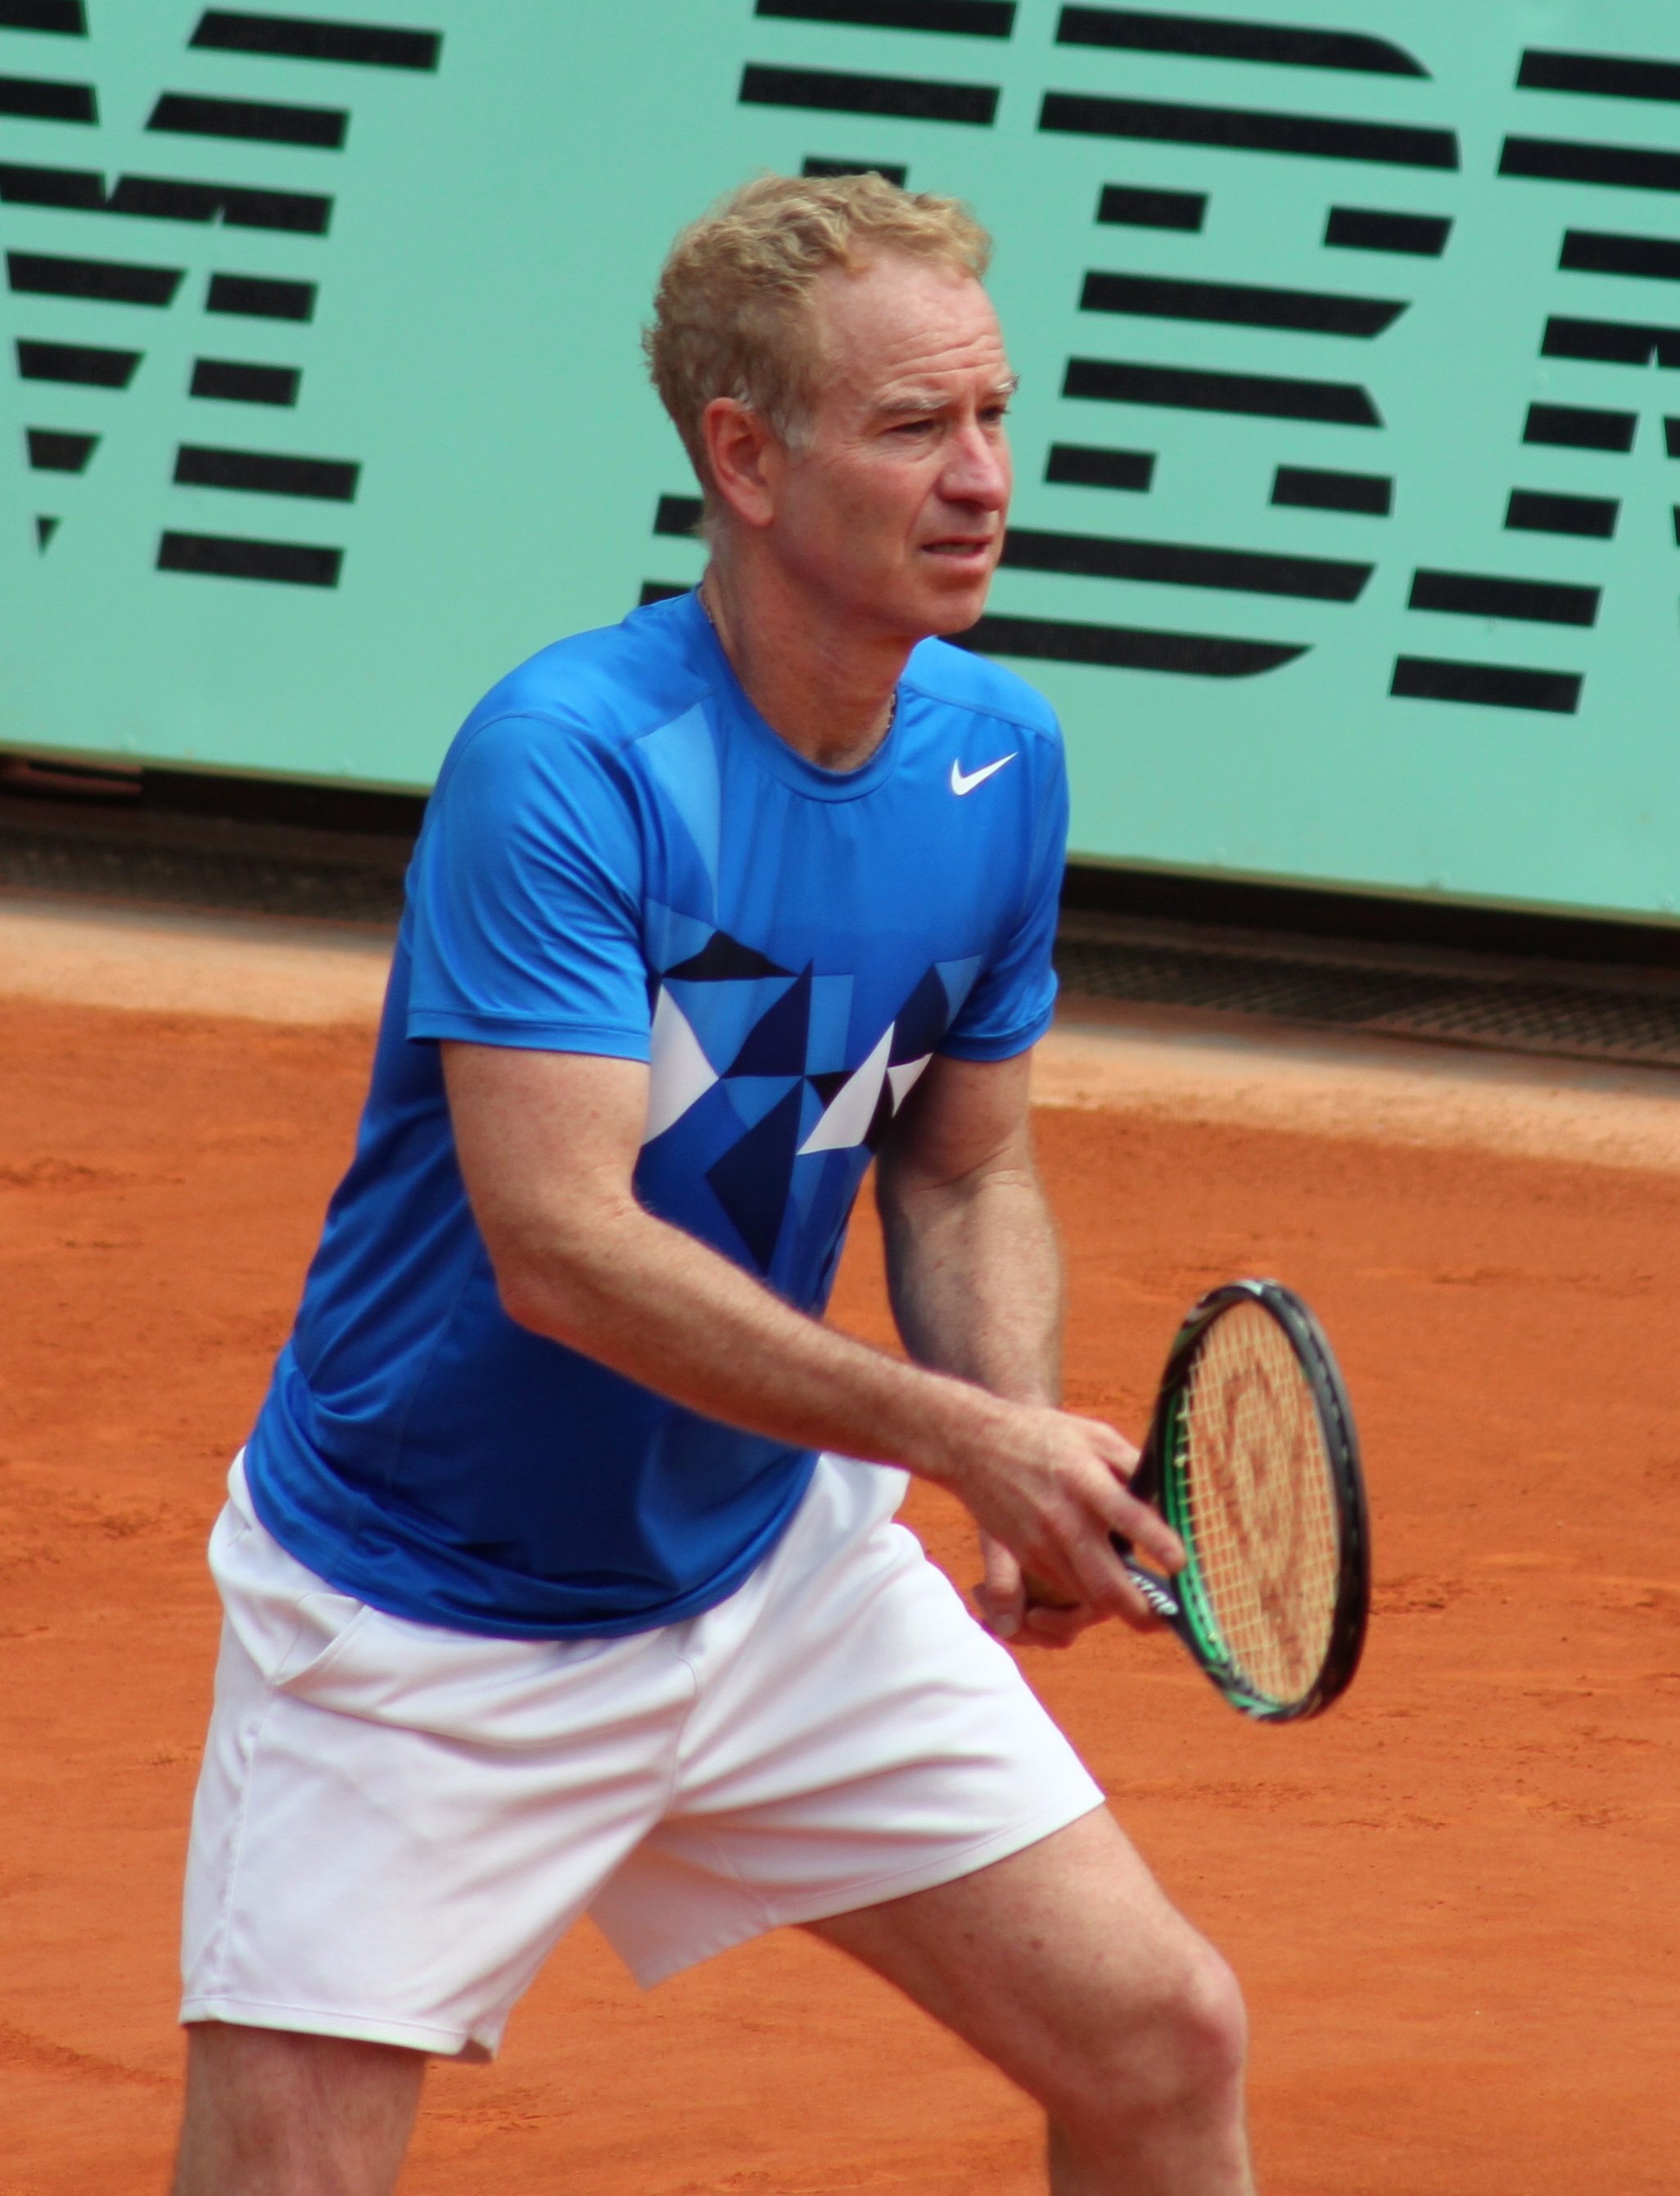 John McEnroe at the 2012 French Open – Legends Over 45 Doubles | Photo By Pruneau - Own work, CC BY-SA 3.0, Wikimedia Commons Images